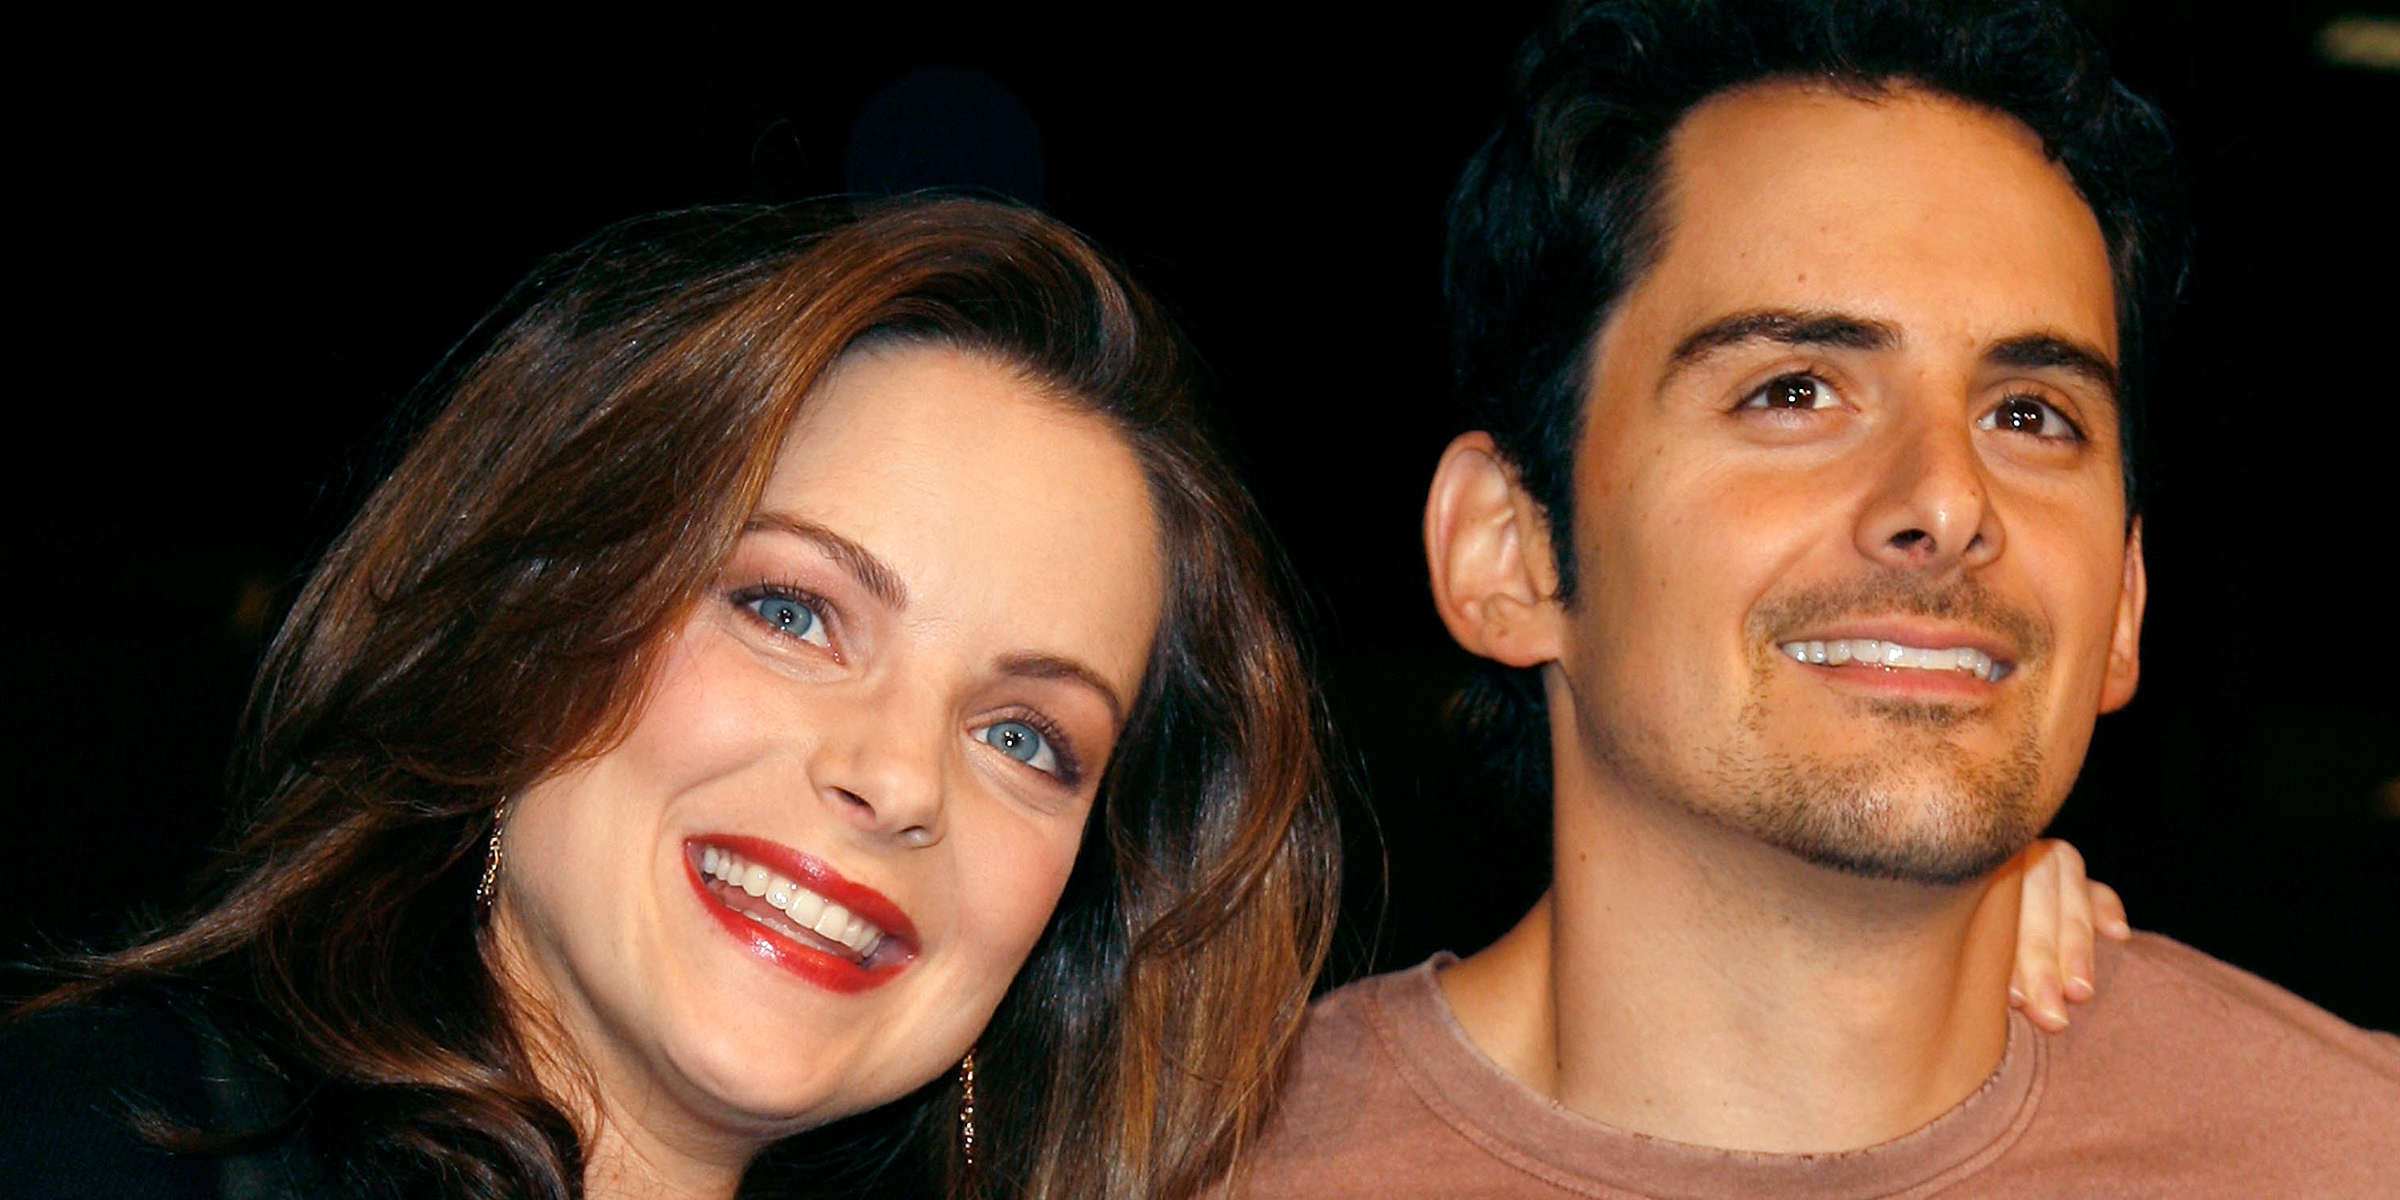 Kimberly Williams-Paisley and Brad Paisley | Source: Getty Images